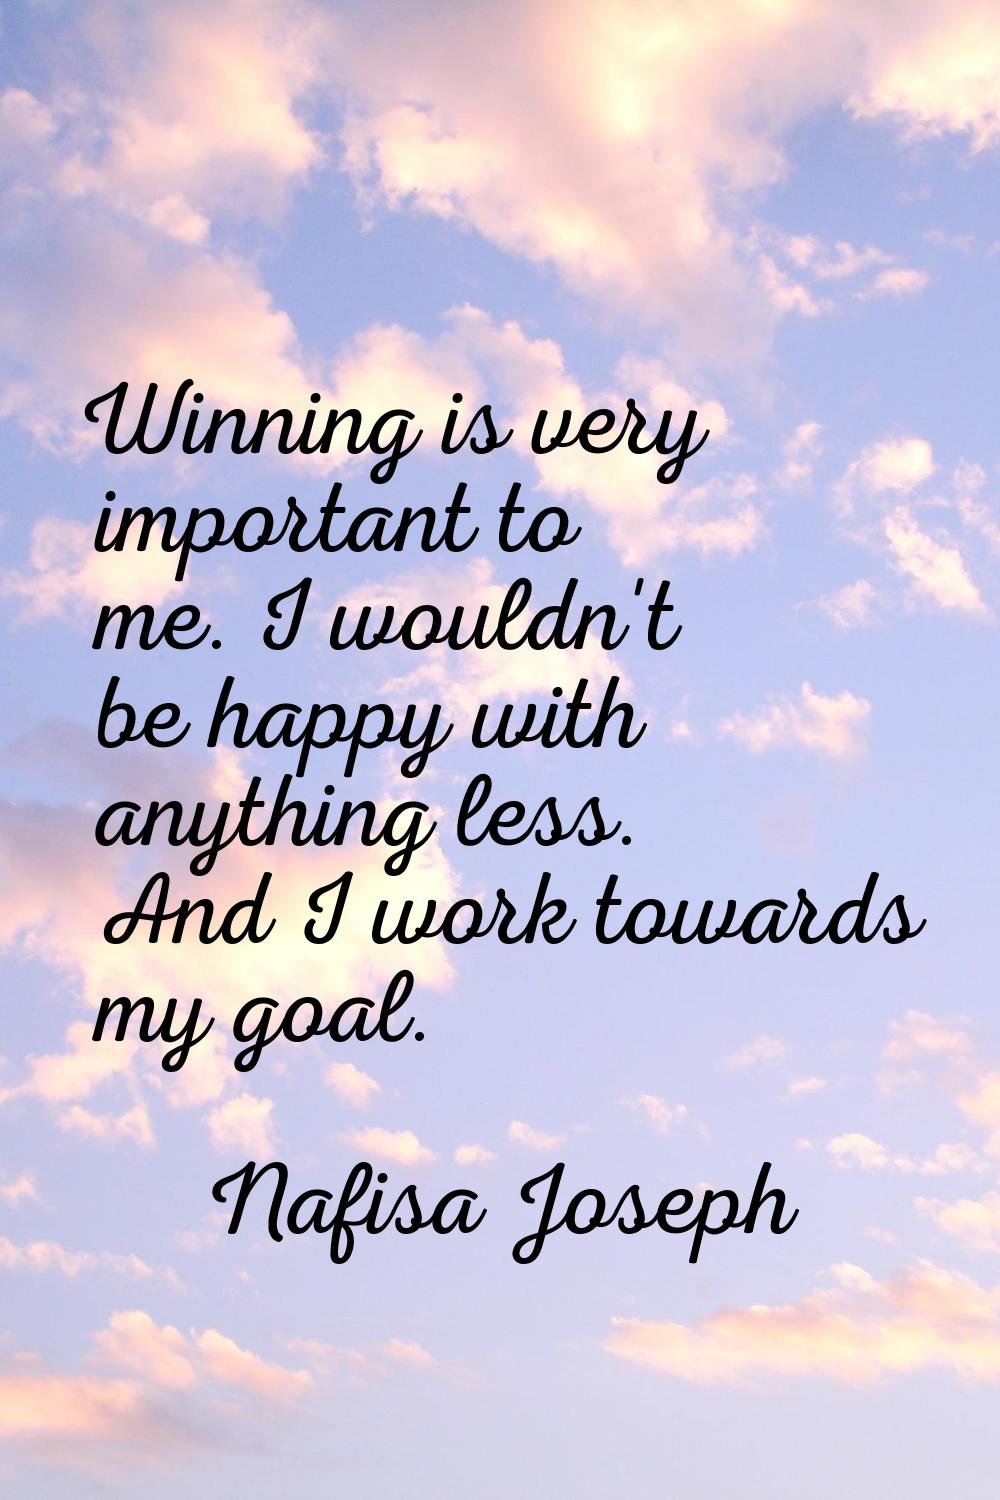 Winning is very important to me. I wouldn't be happy with anything less. And I work towards my goal